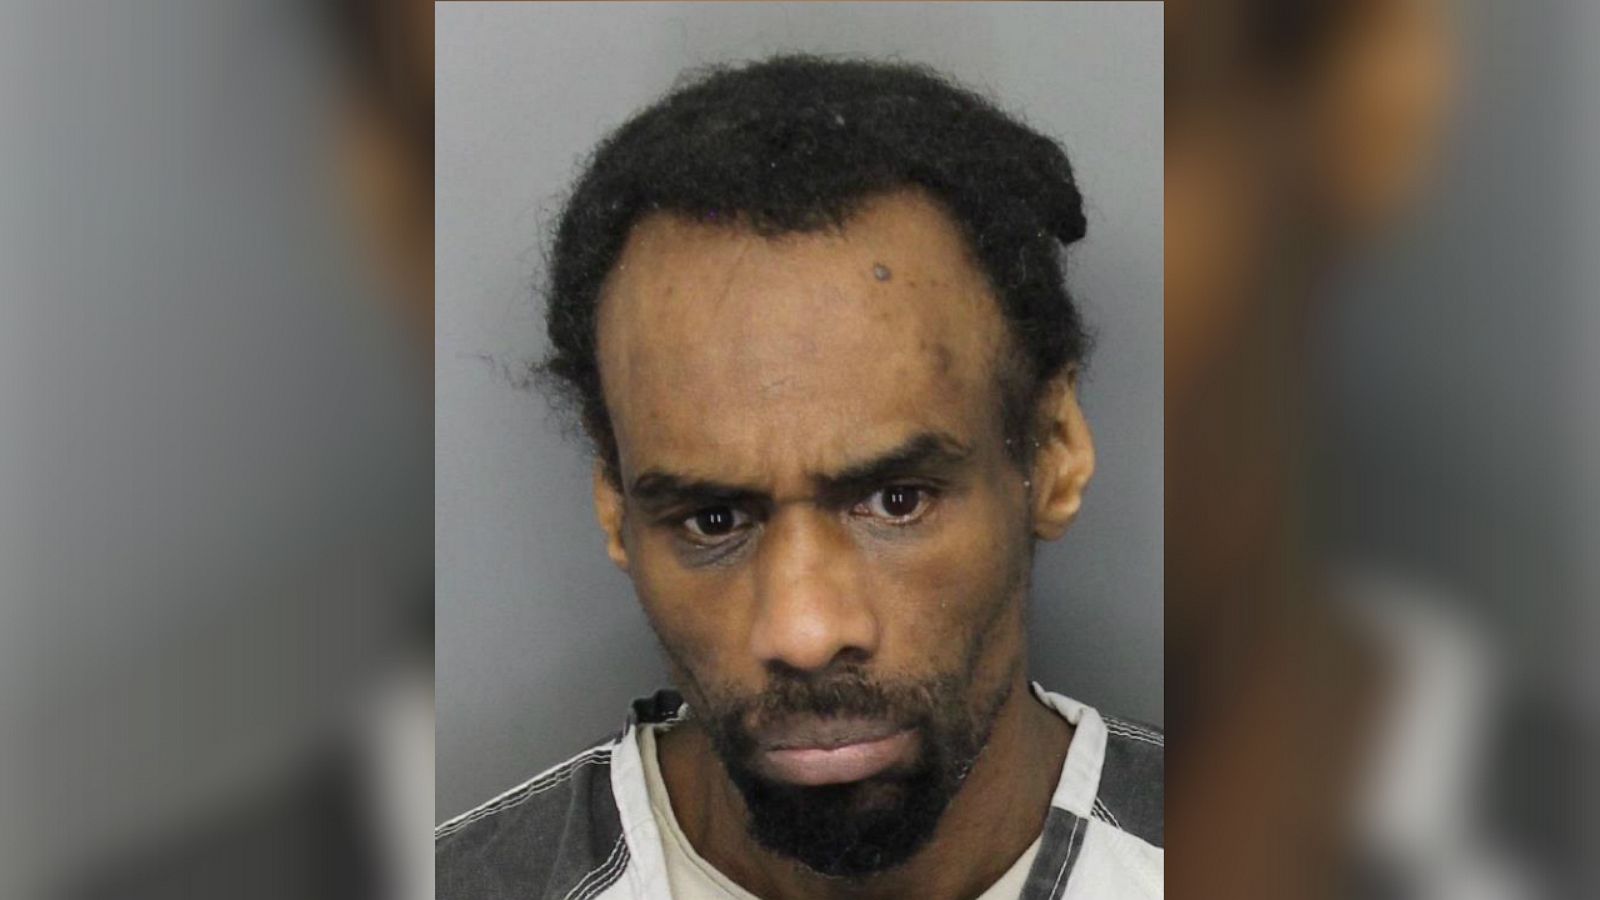 Half-naked sex offender arrested breaking into home through doggy door